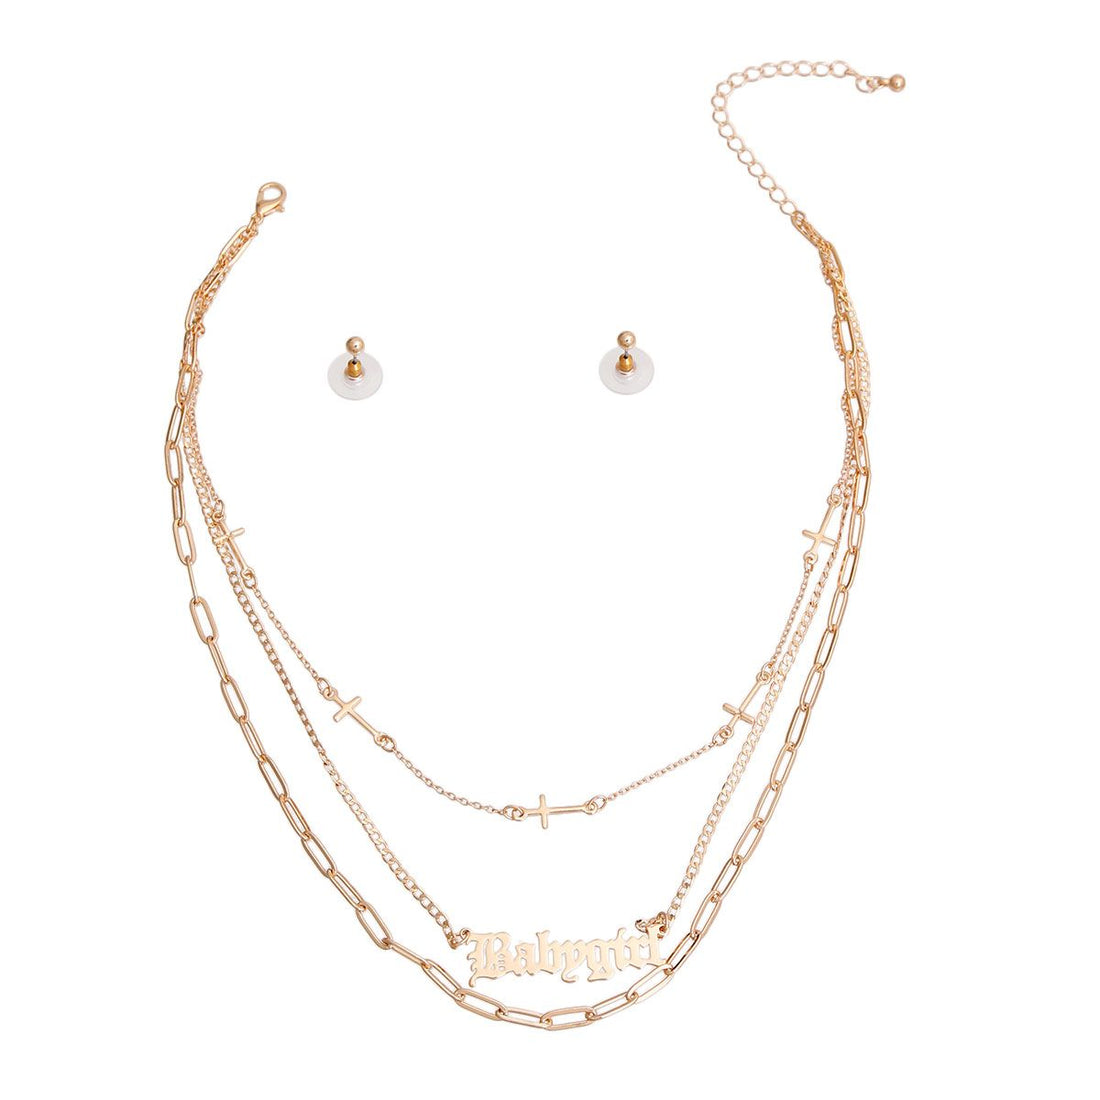 Baby Girl 3 Layer Chain Necklace